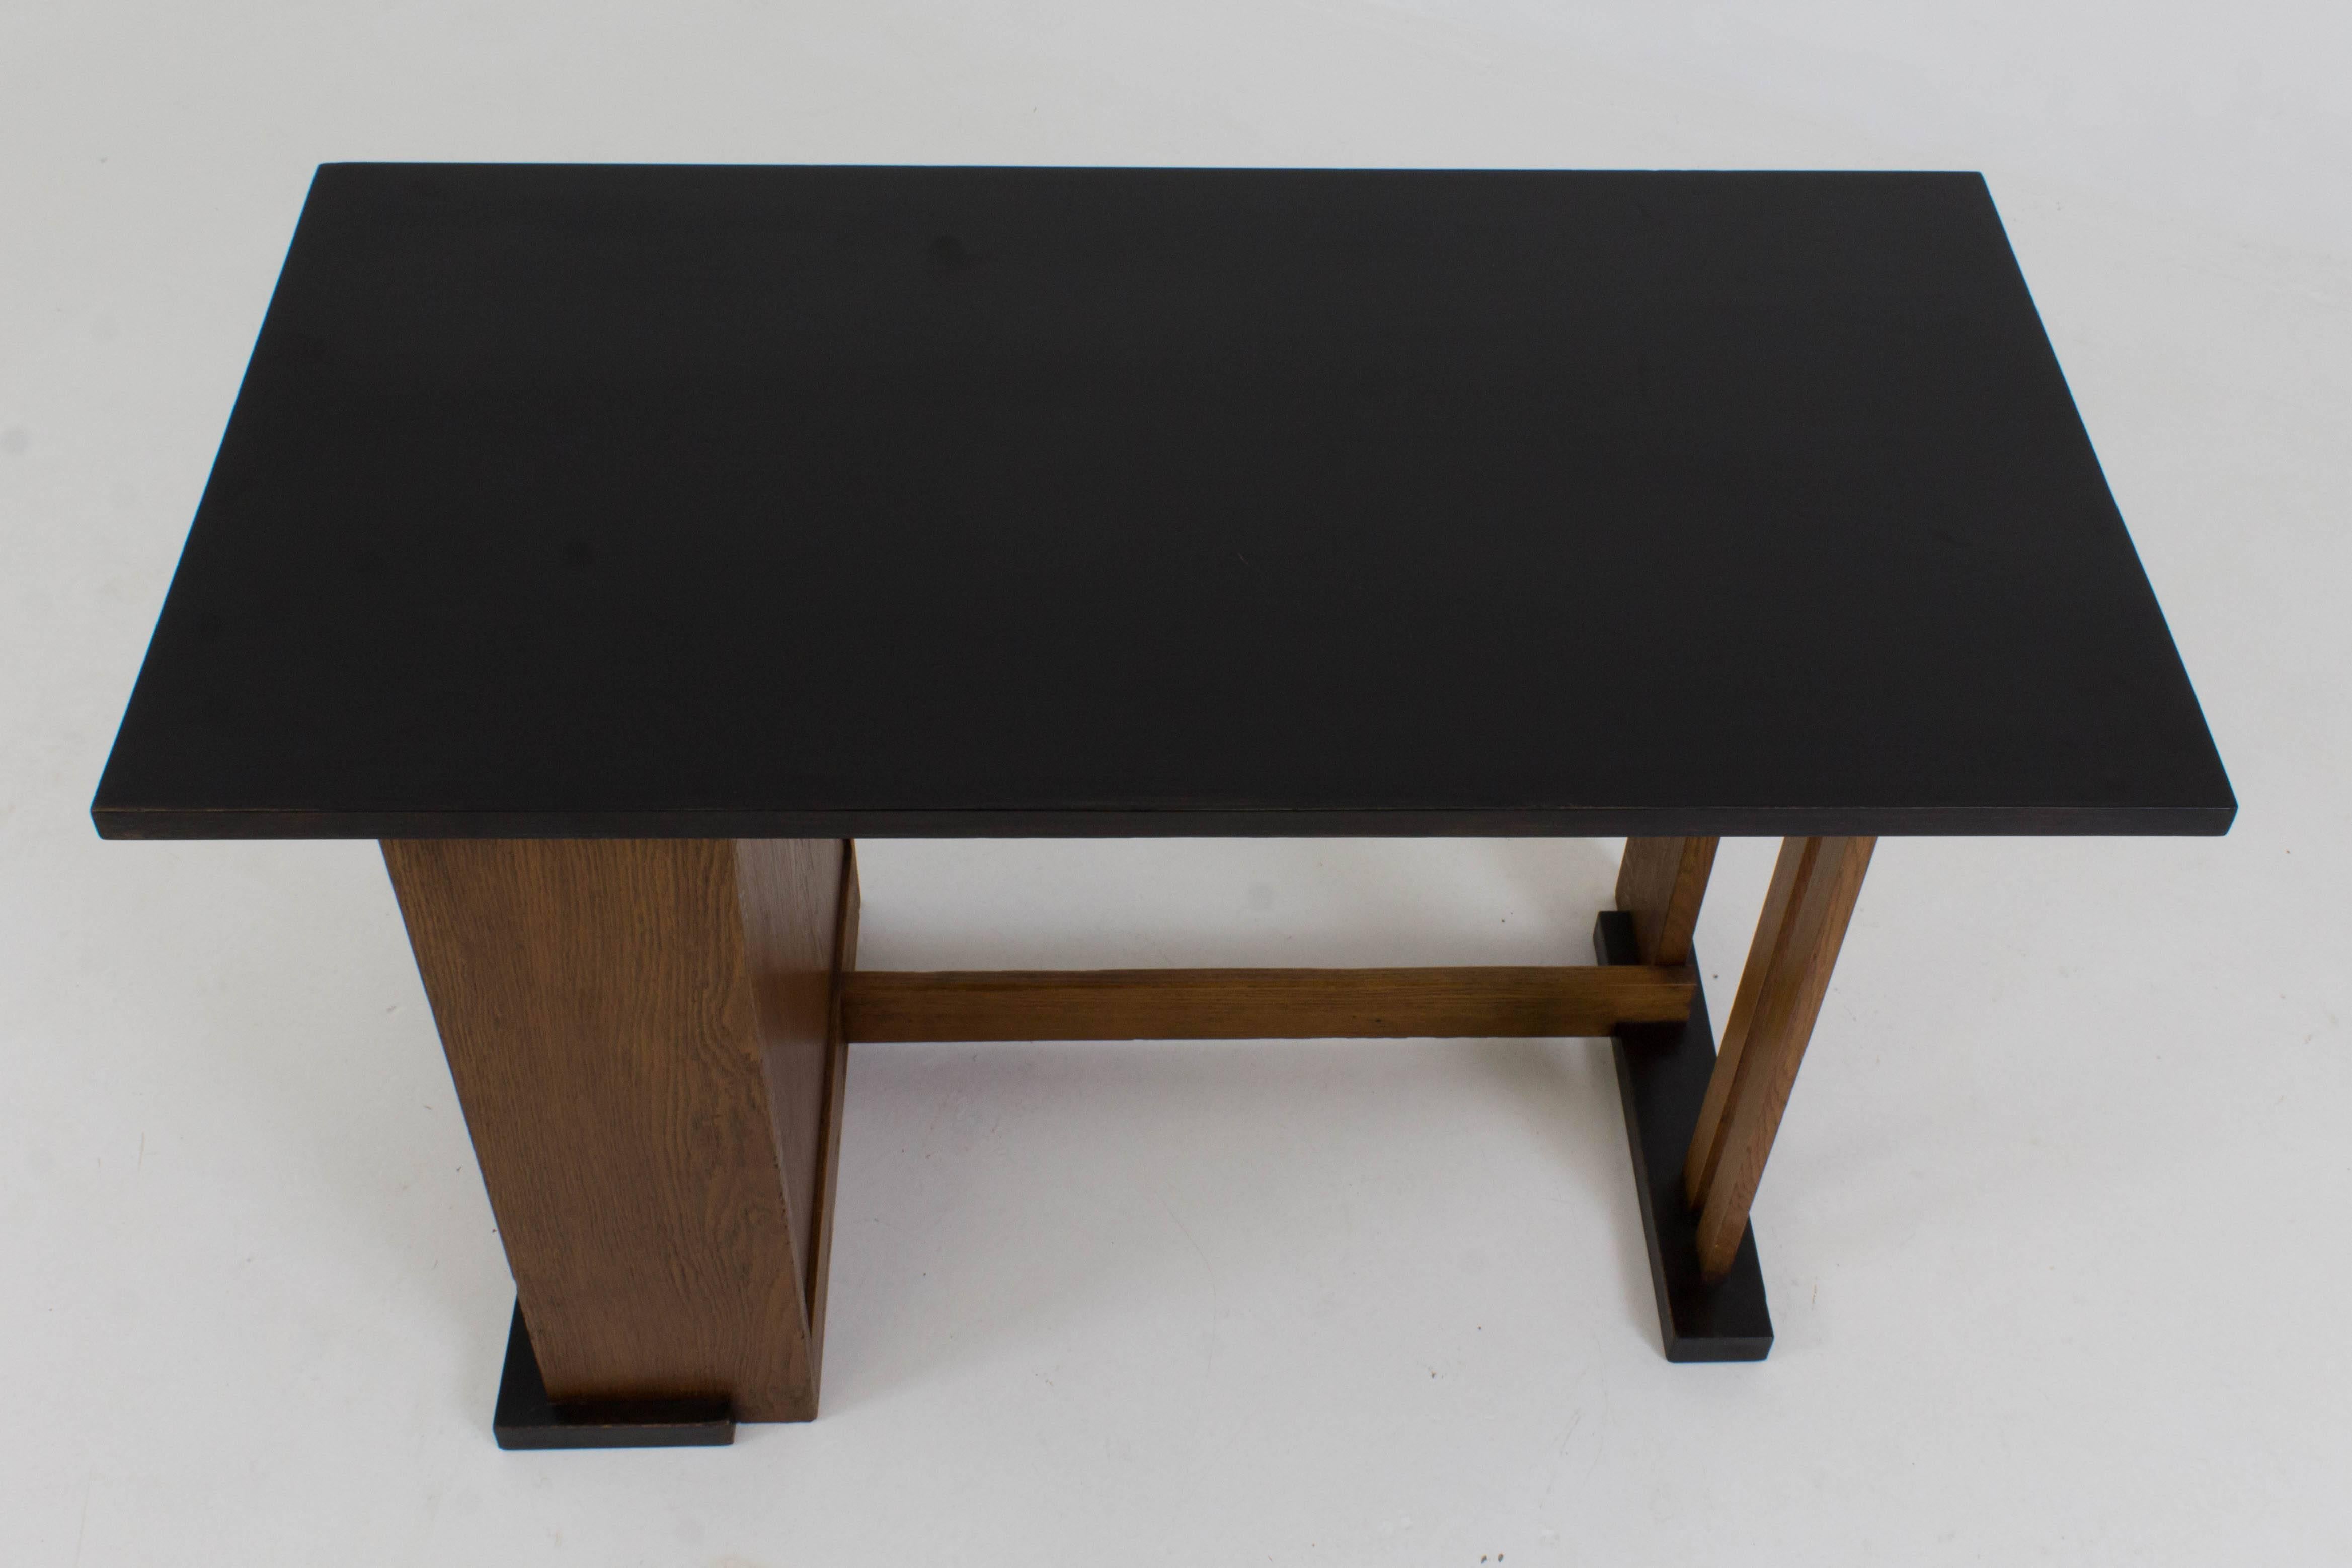 Lacquered Important and Rare Art Deco Haagse School Desk by Cor Alons for L.O.V.